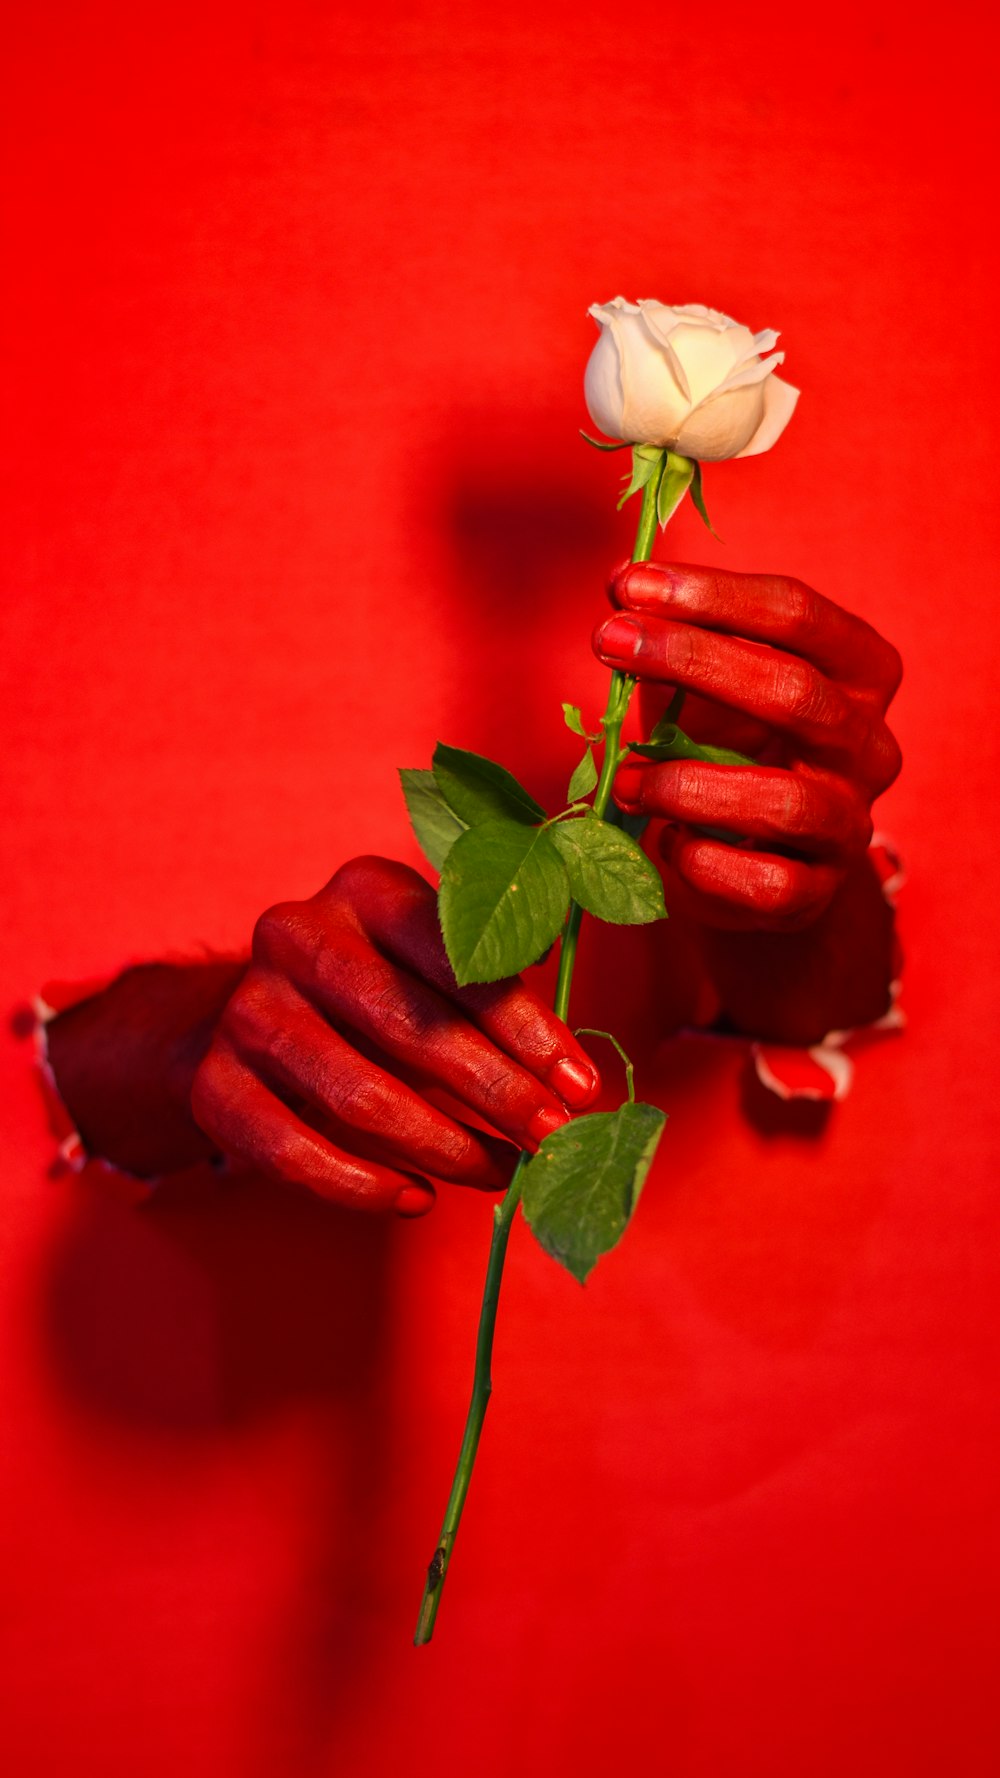 a hand holding a white rose on a red background